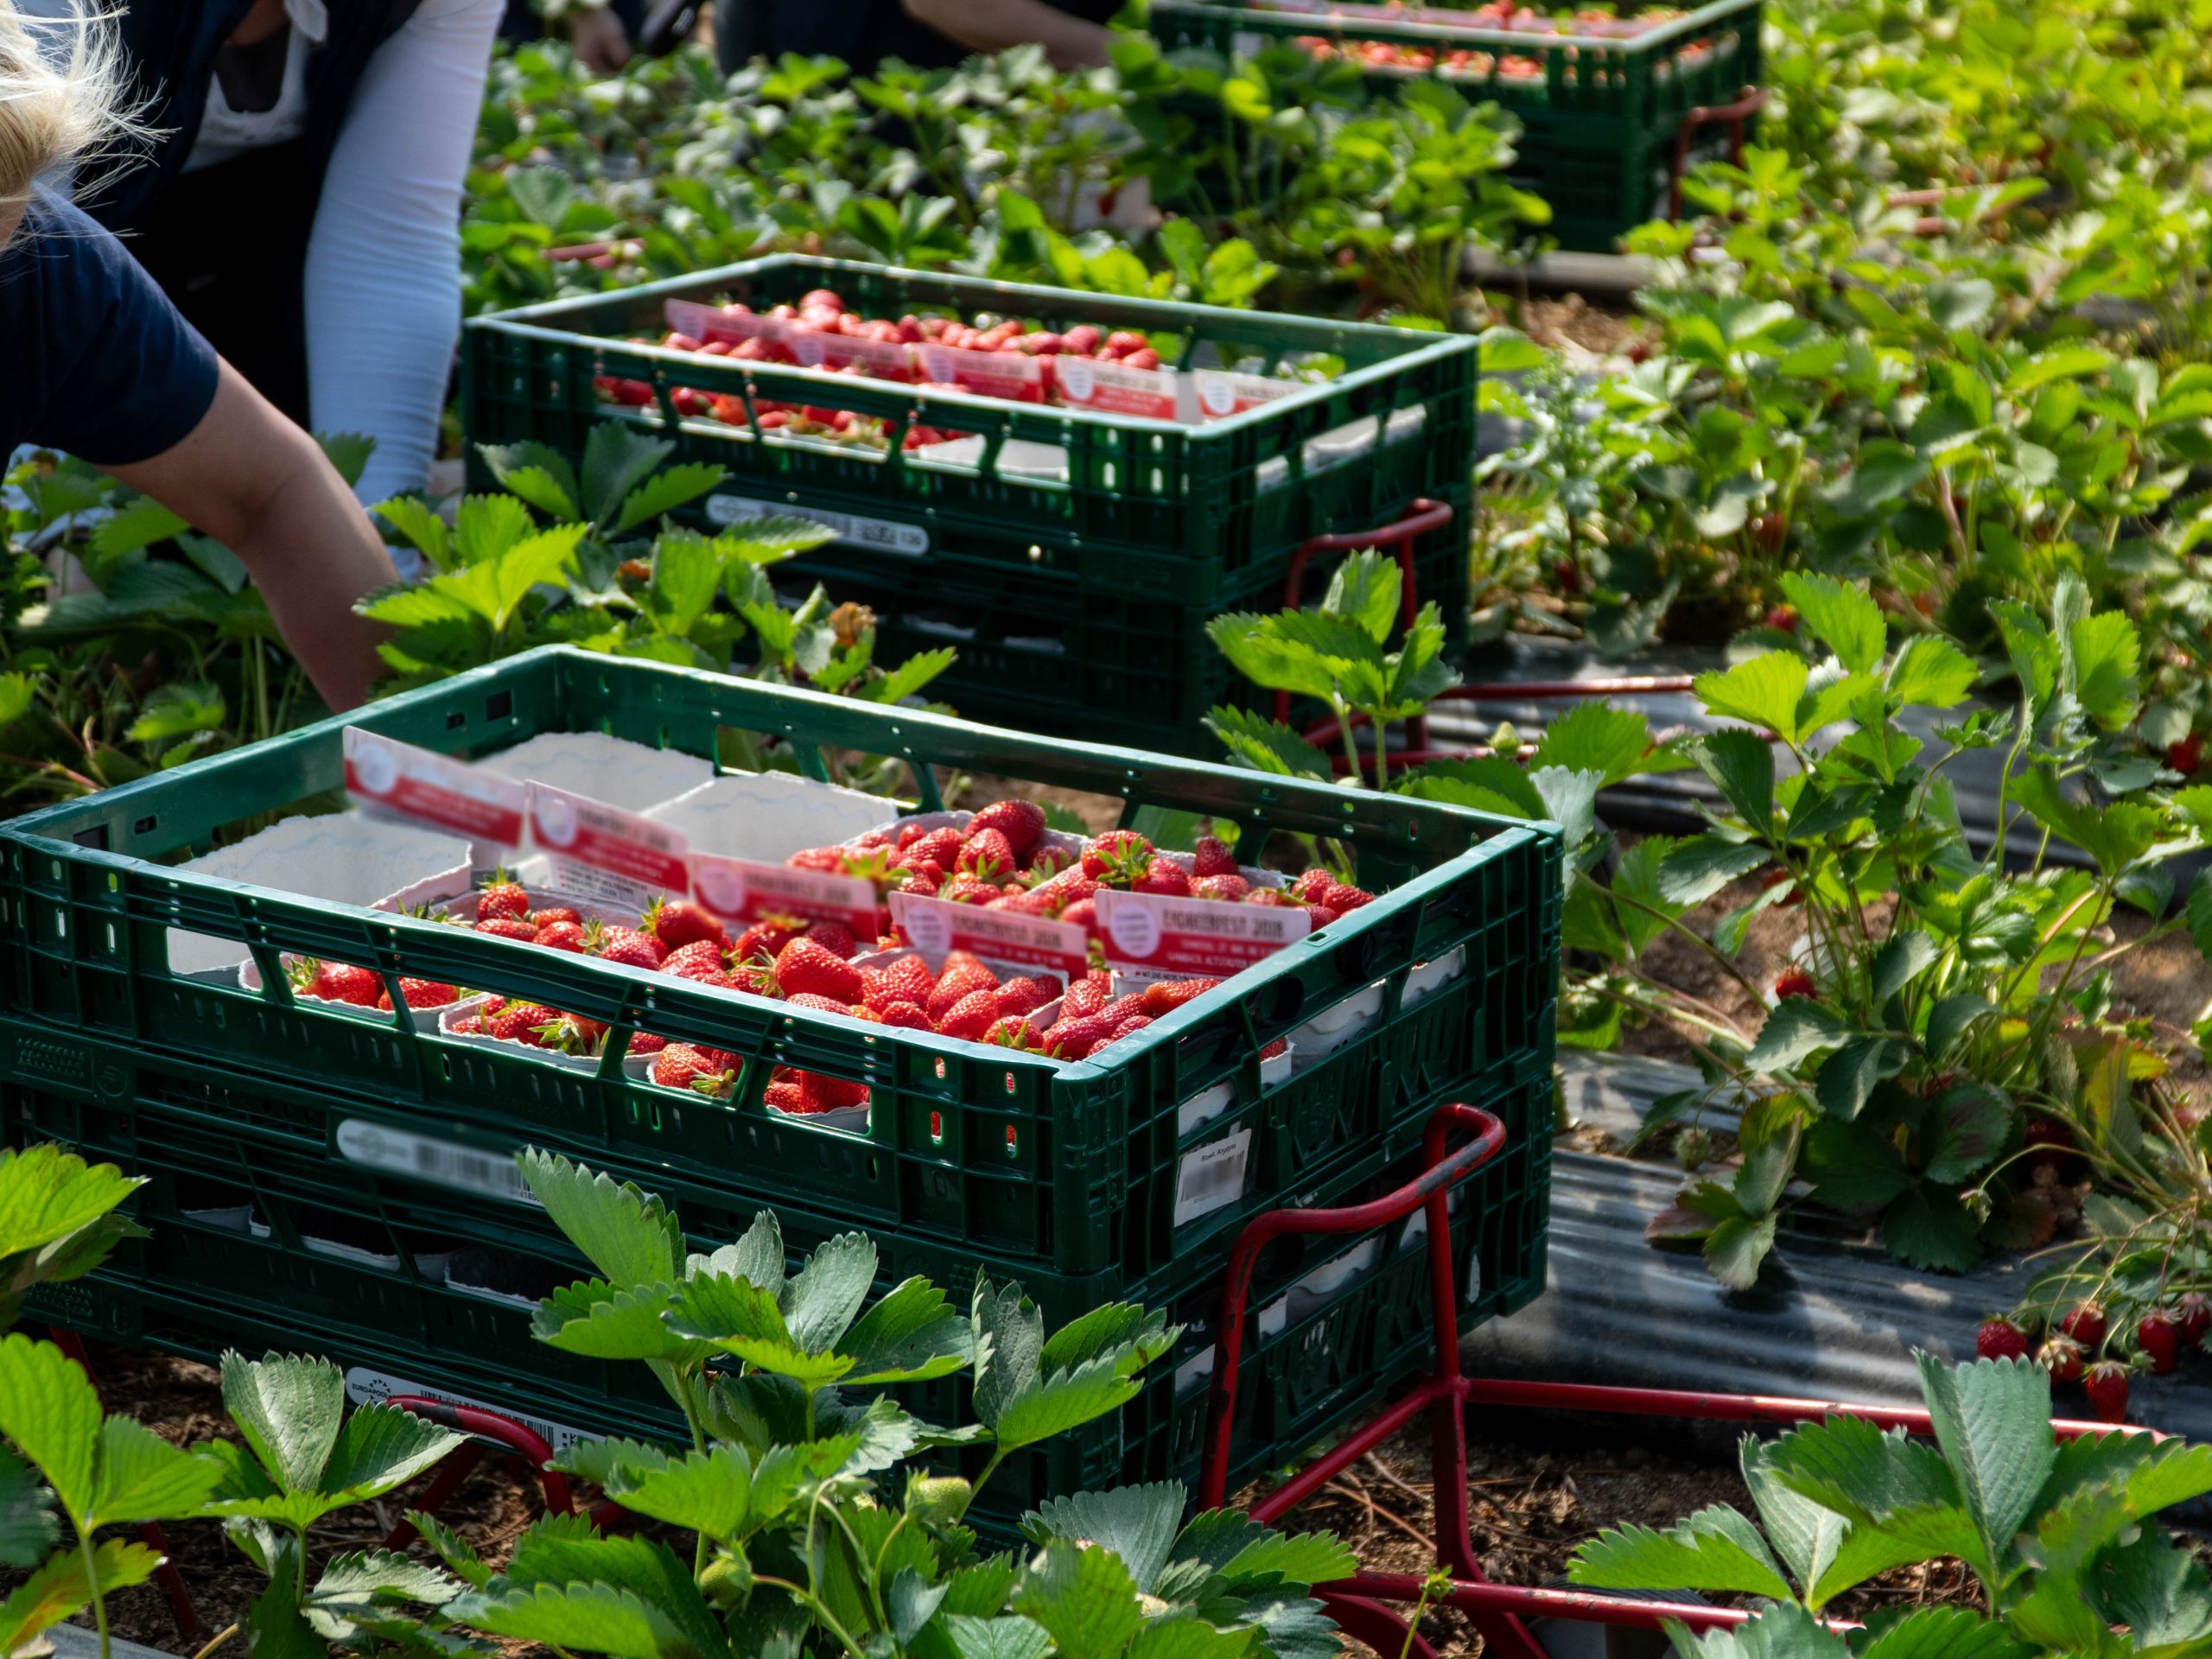 Hort Innovation consulted berry growers Australia-wide to identify viable, cost-effective technology to address one of the sector’s greatest challenges: harvesting labour.